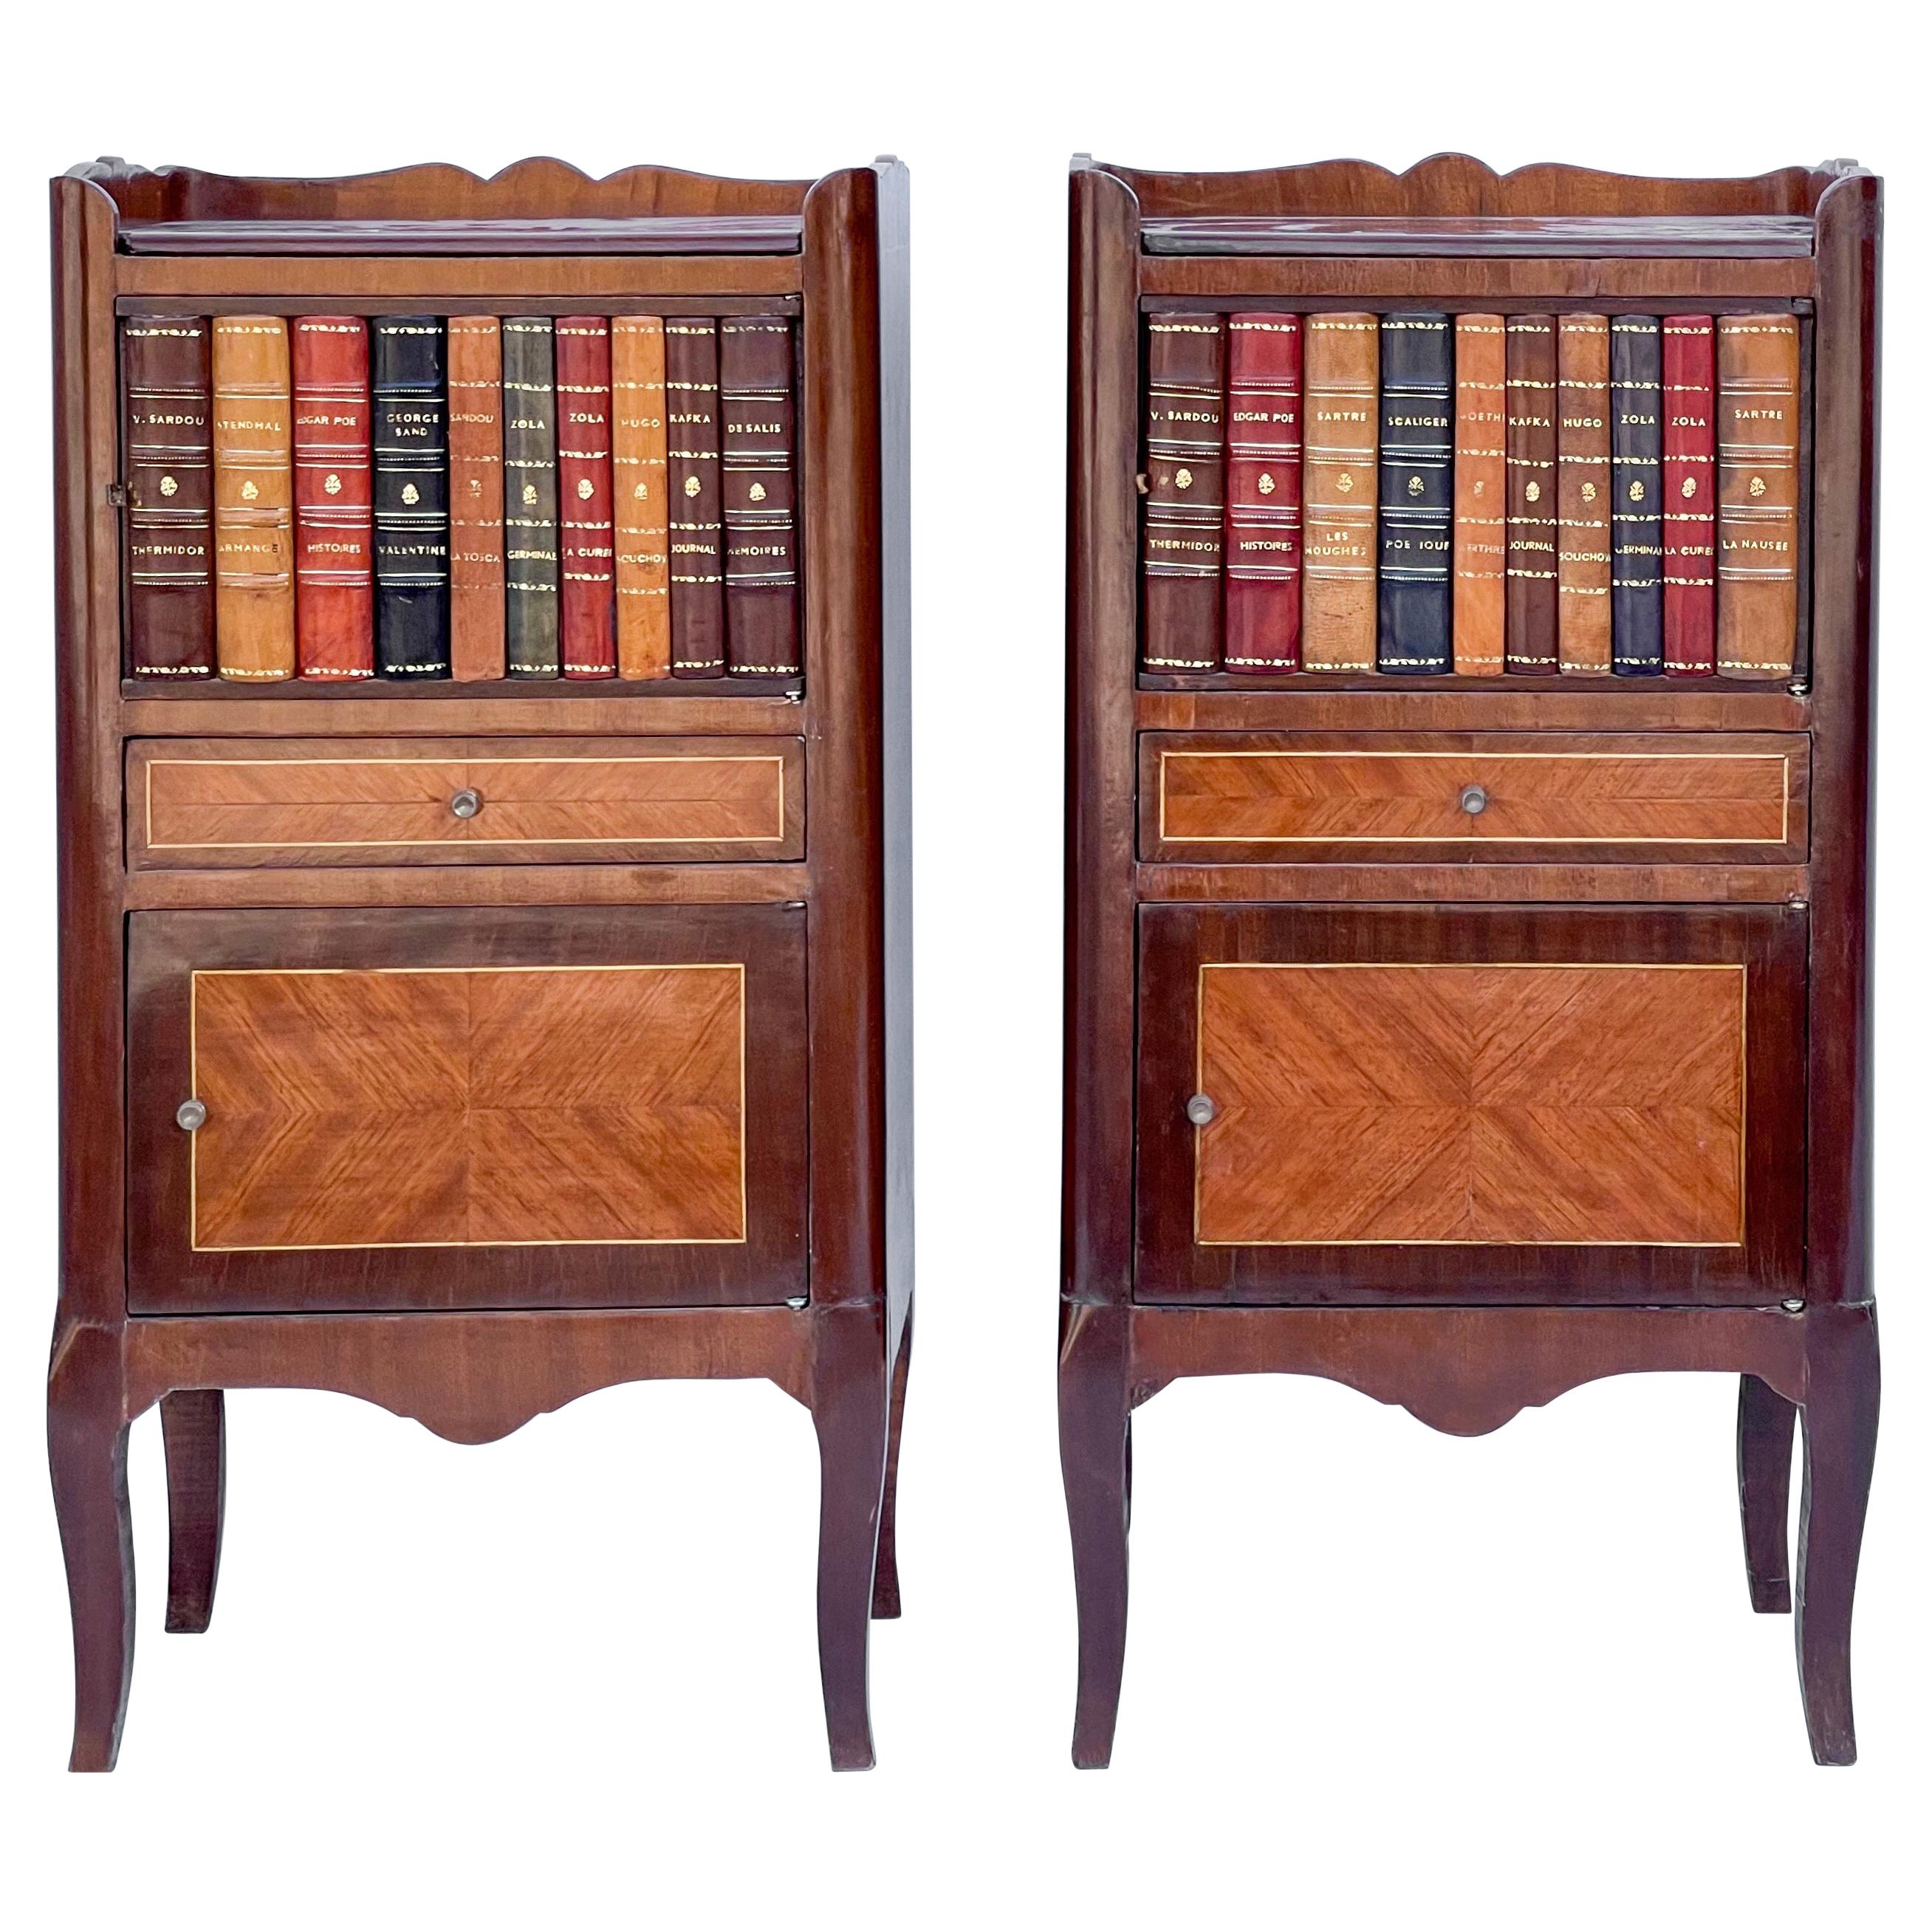 1950s French Style Inlaid Mahogany and Leather Faux Book Side Tables, Pair